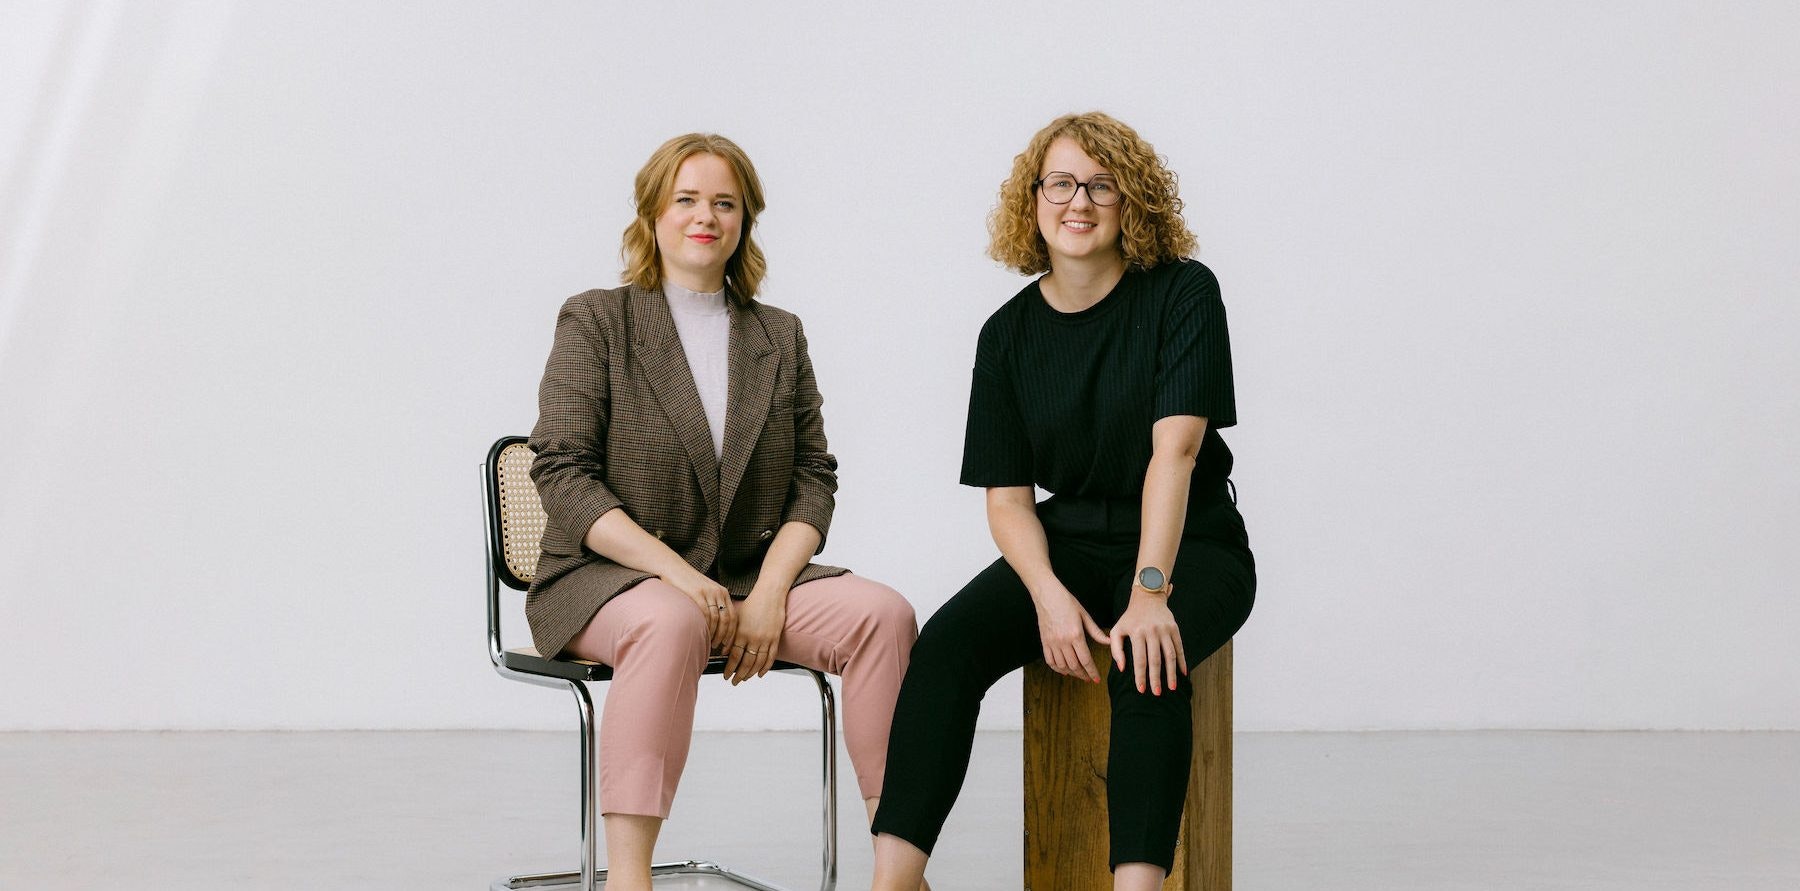 A landscape photo of the founders of Fund F, Lisa-Marie Fassl and Nina Wöss